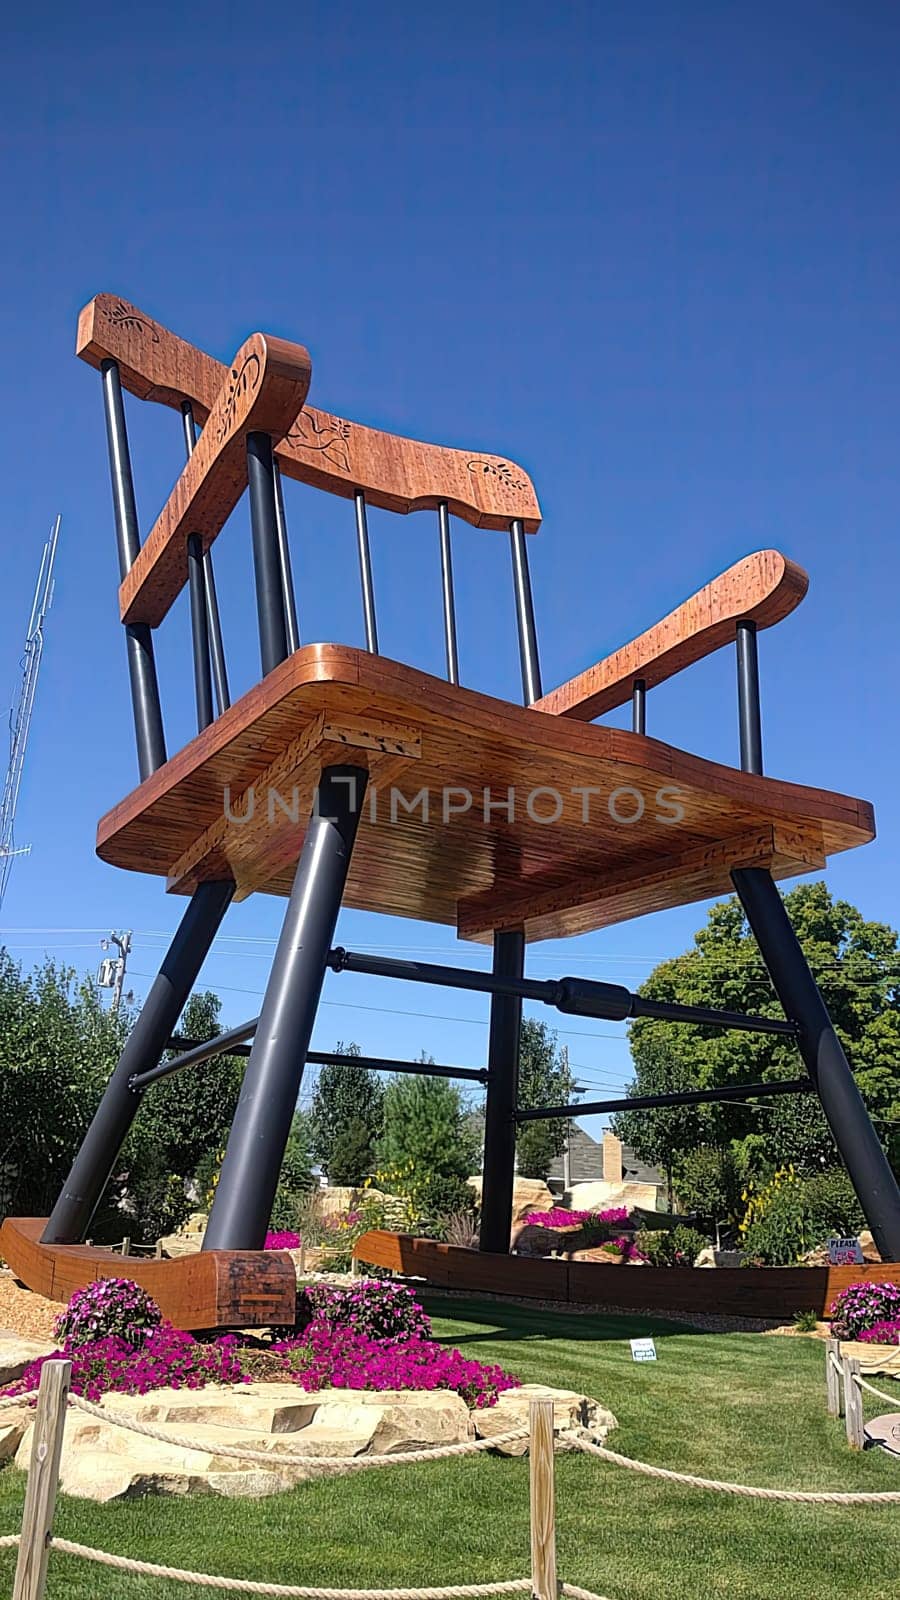 Whimsical oversized wooden chair sculpture in a beautiful public garden under clear blue sky